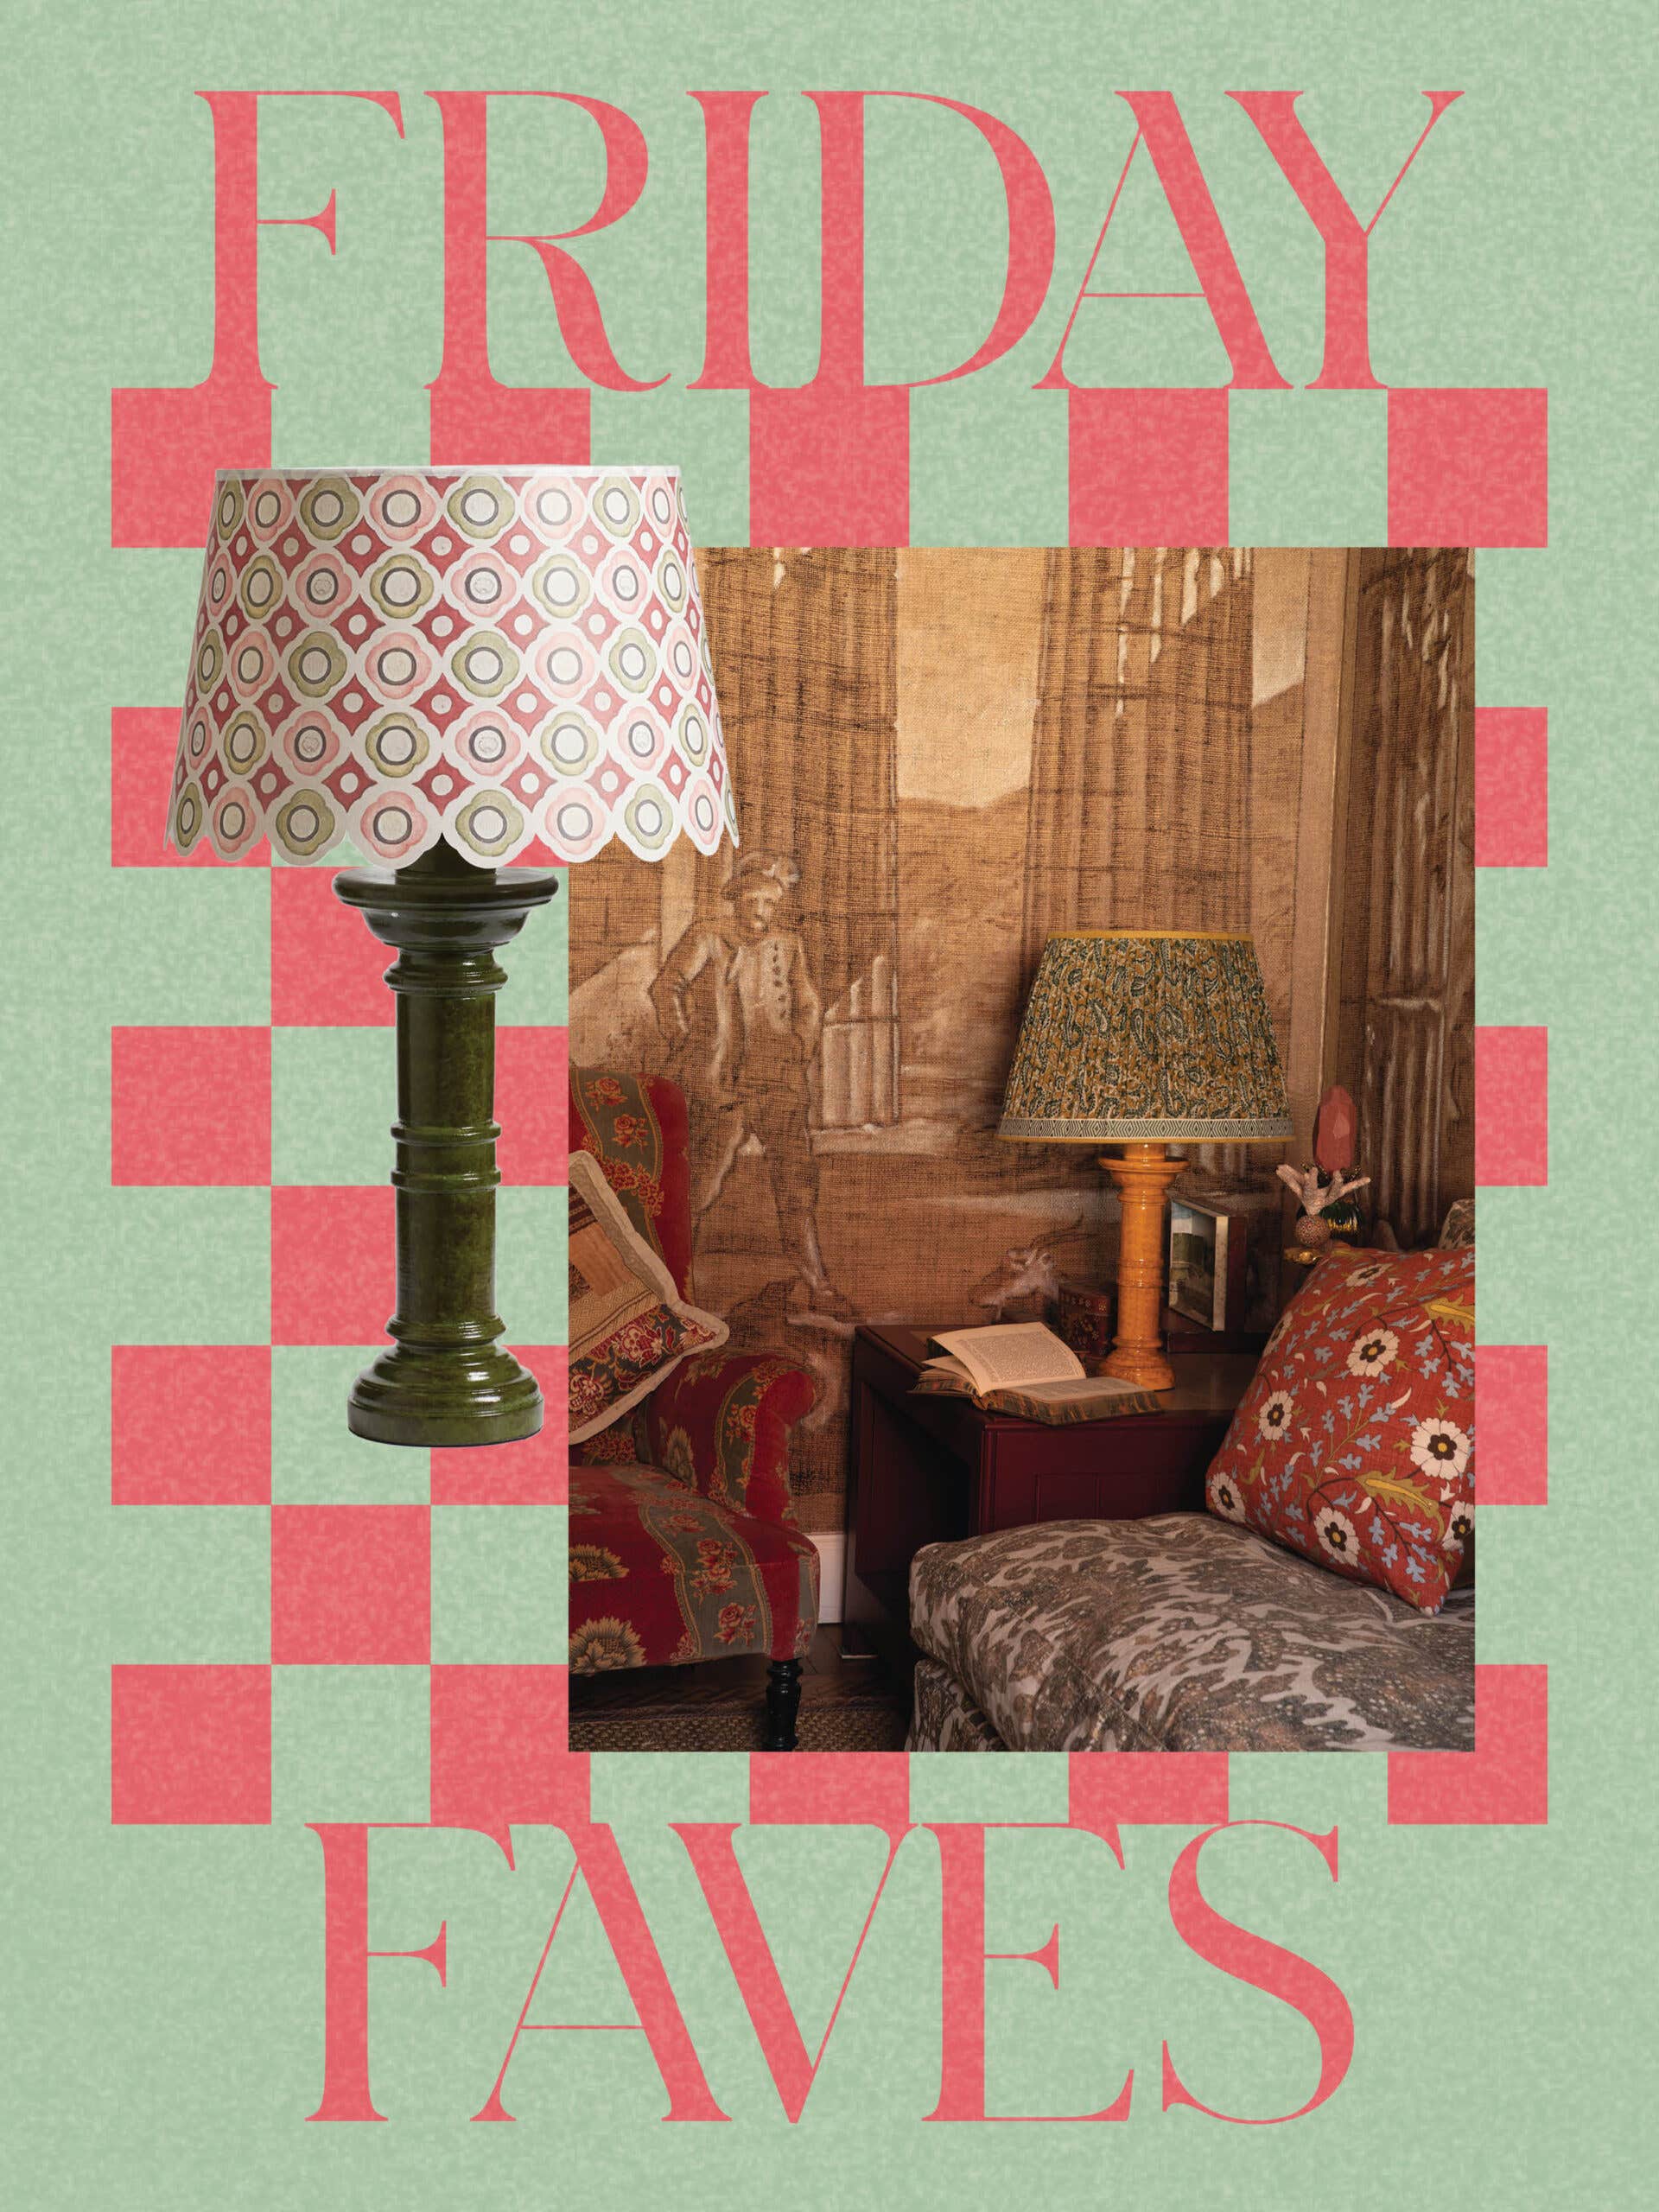 Venetian Frescoes and Indian Fabric Inspired This Charming Lamp Collection